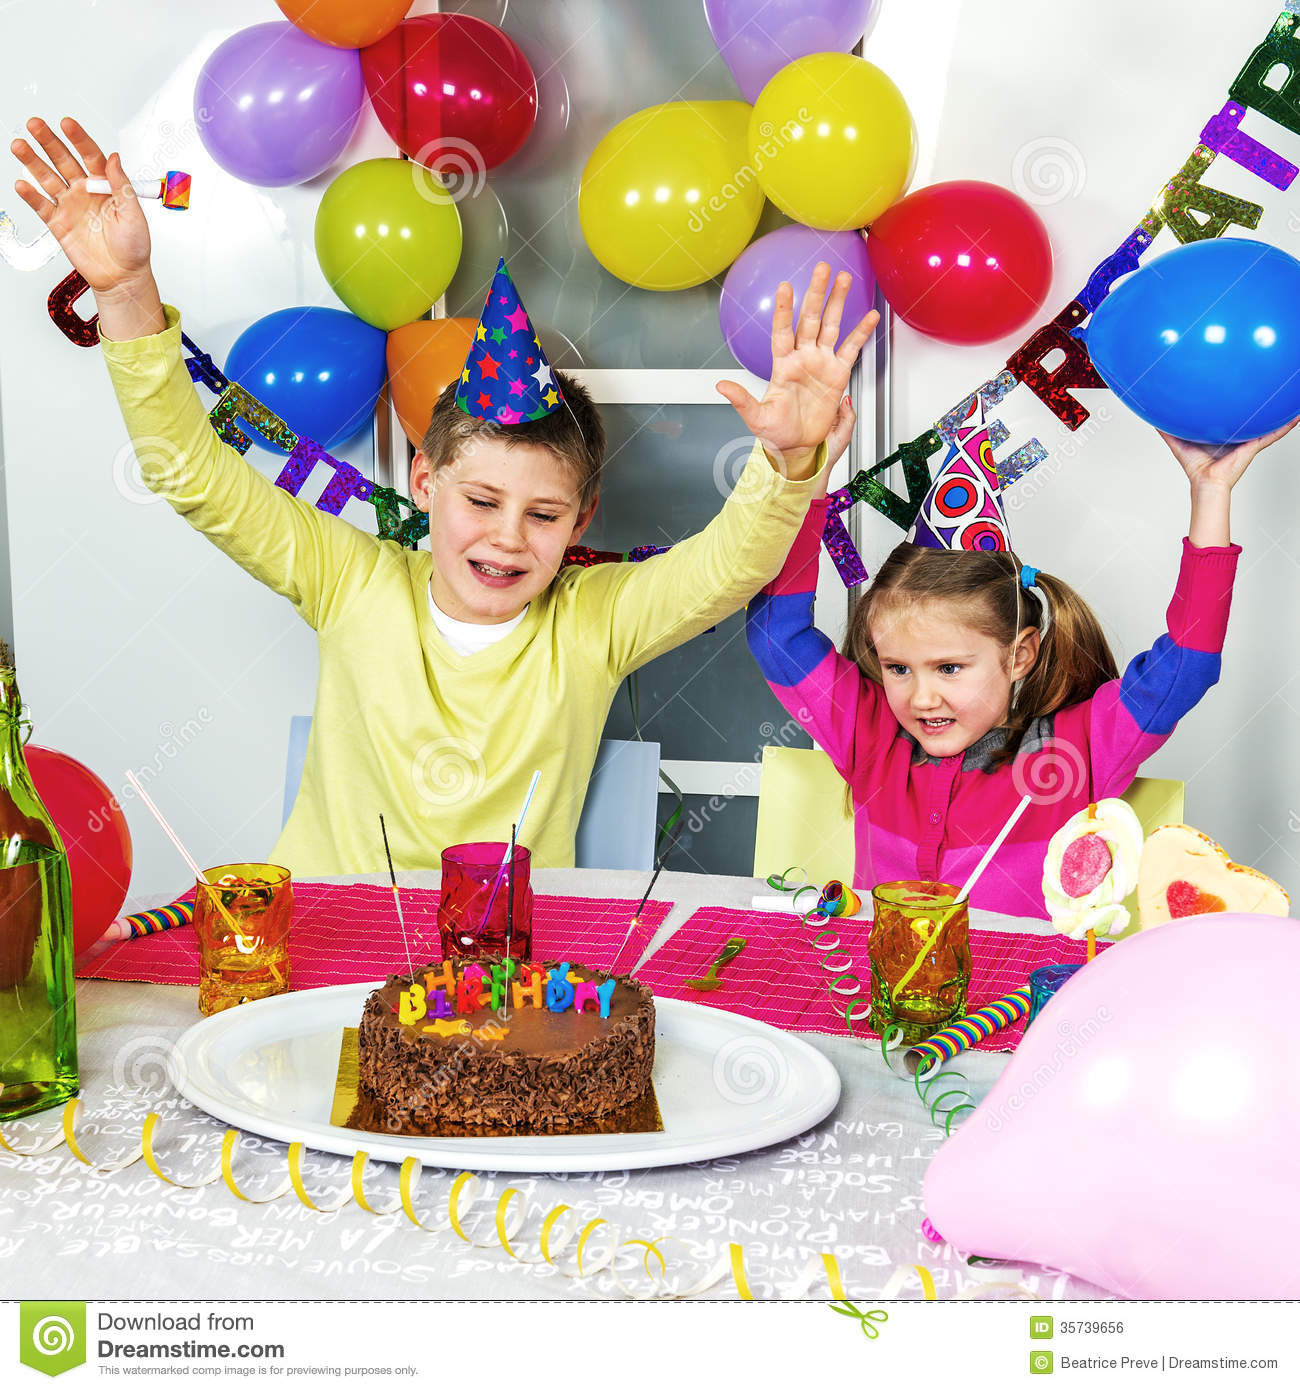 Funny Birthday Party Pictures
 Big funny birthday party stock photo Image of festive